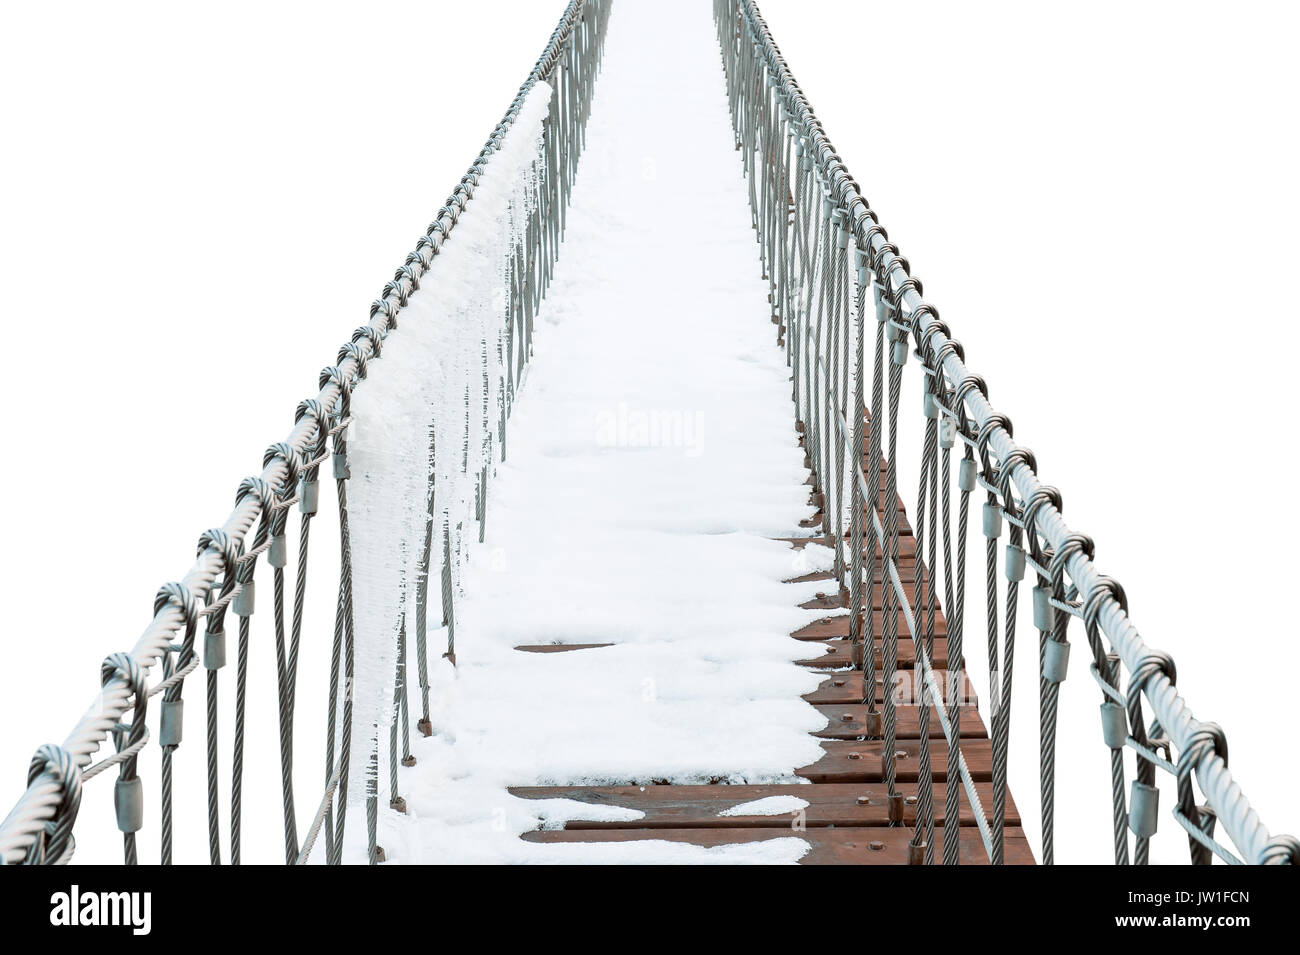 suspension bridge of iron chain and woods in winter on white background. Stock Photo